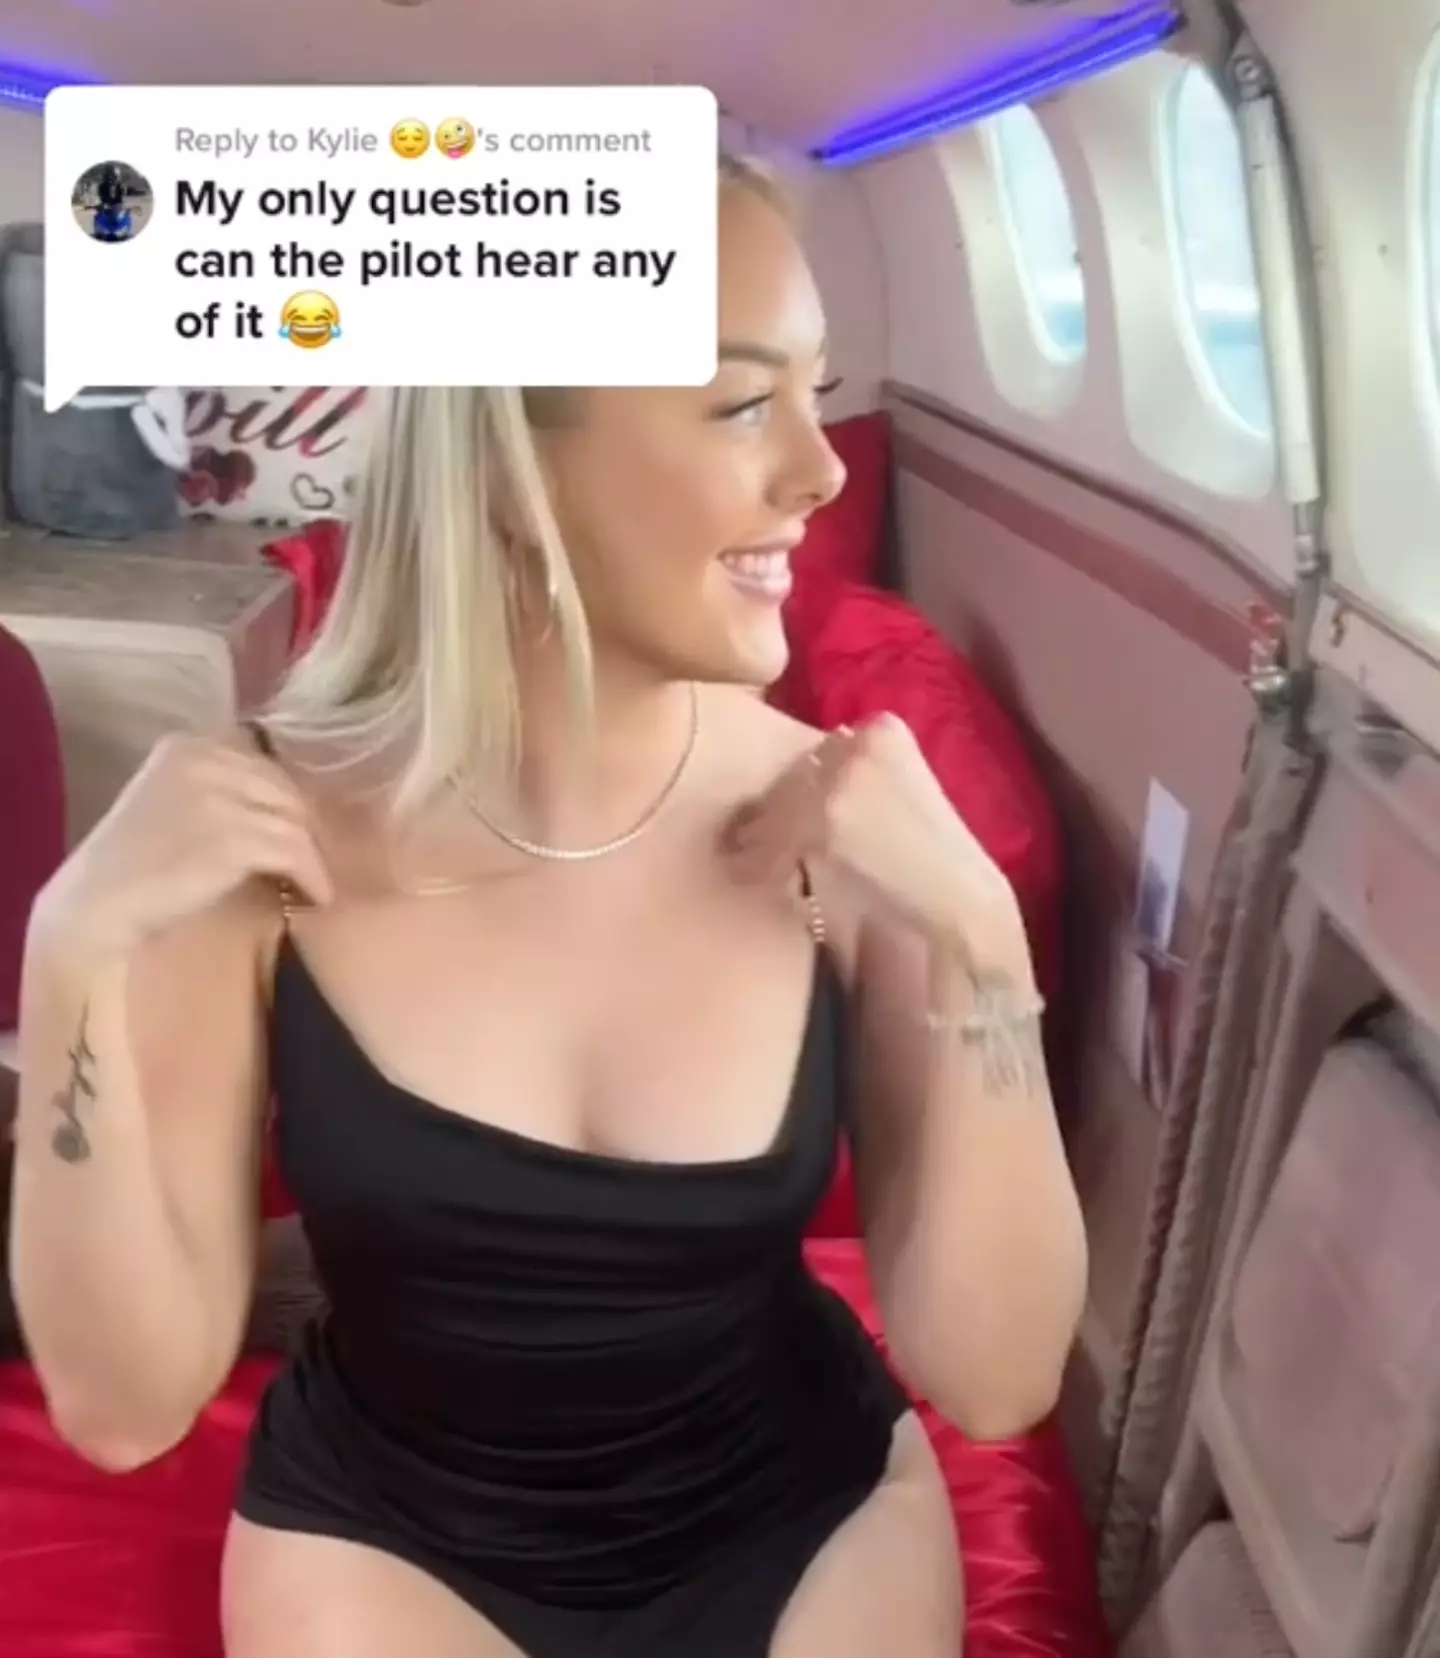 The video shows how to join the Mile High Club.